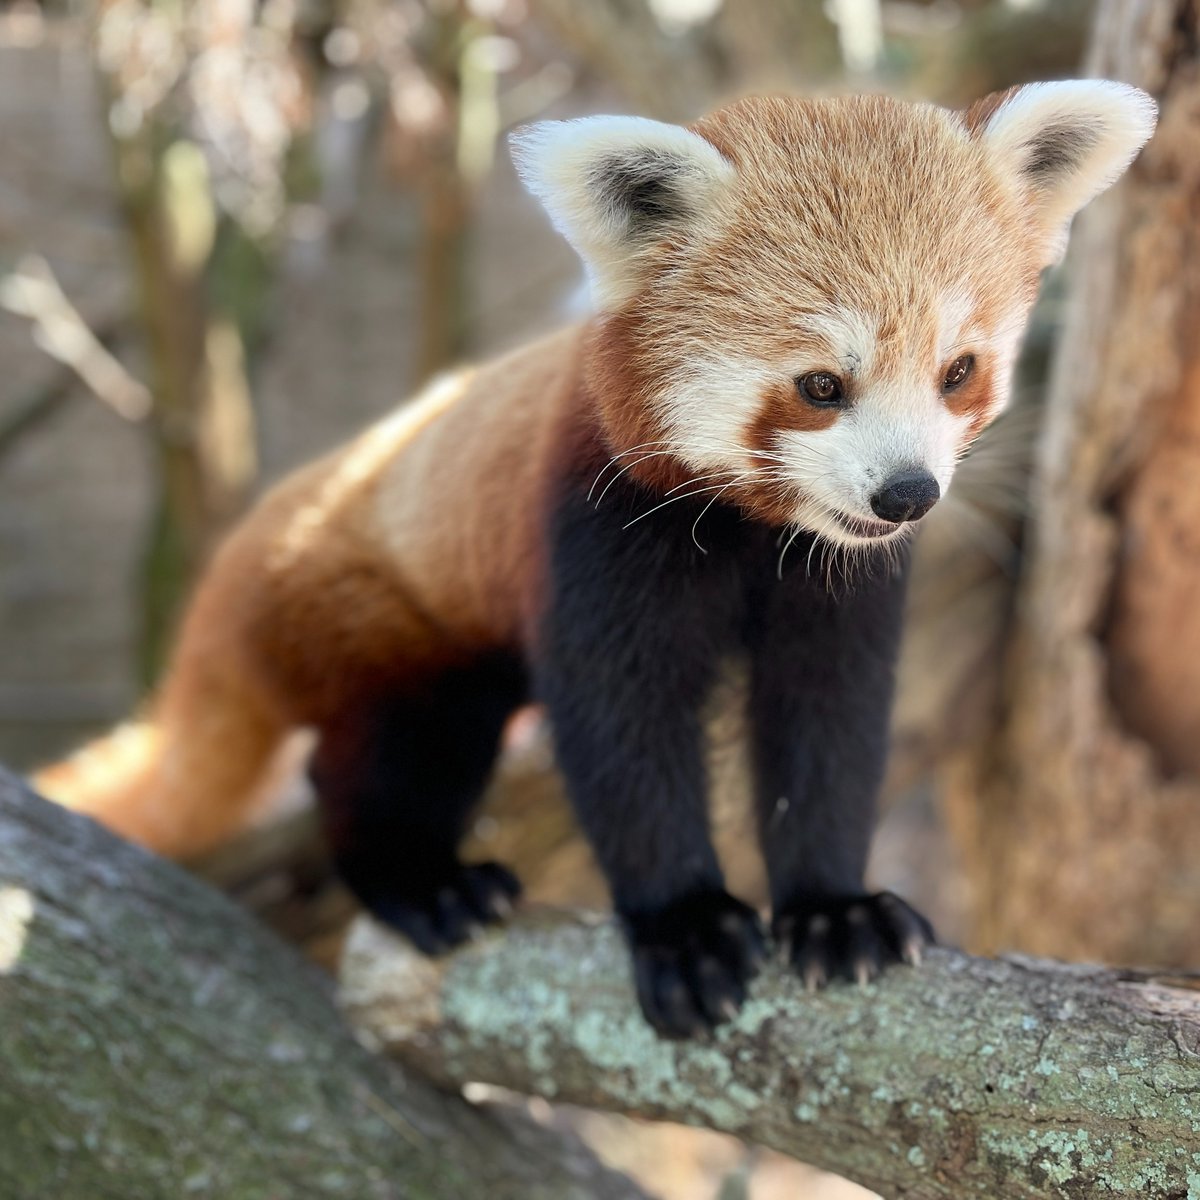 Do you have a red panda shirt? Wear it to the Zoo on September 17th and you’ll receive a FREE ride token in honor of #InternationalRedPandaDay! Be sure to tag us on social media and show that you want to #savetheredpanda!